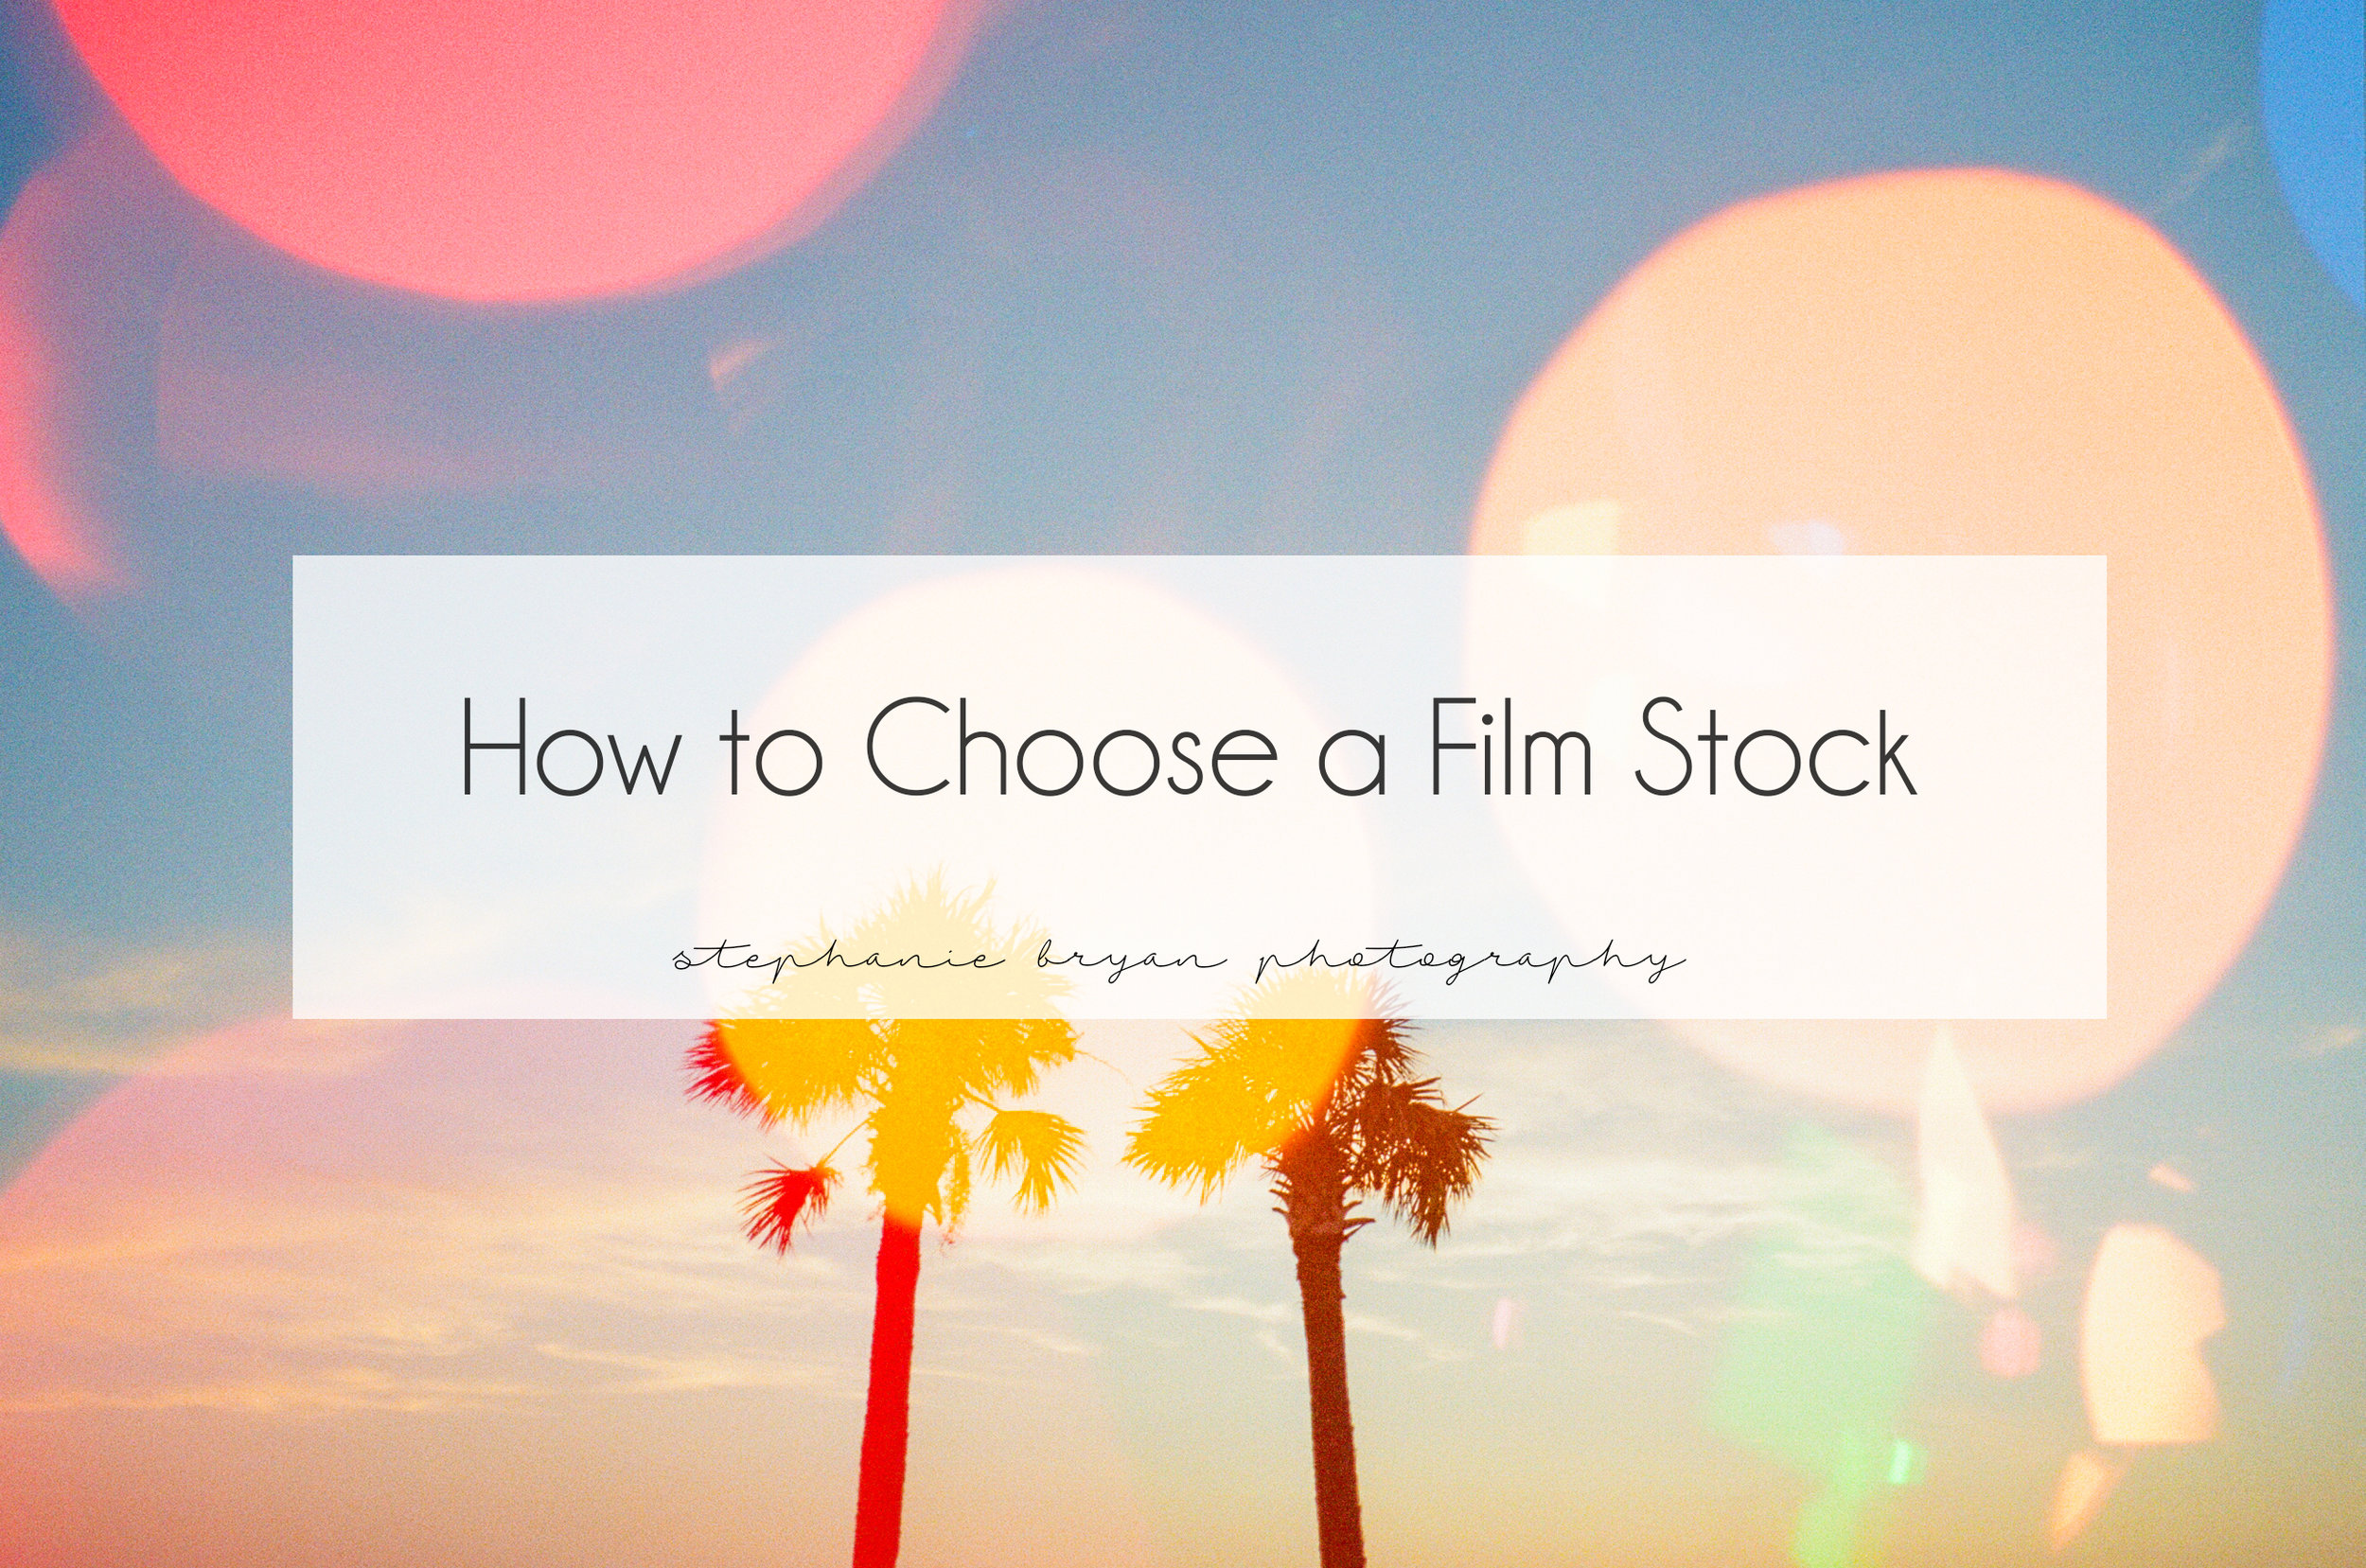 how-to-choose-a-film-stock-film-camera-analogue-photography-tutorial.jpg